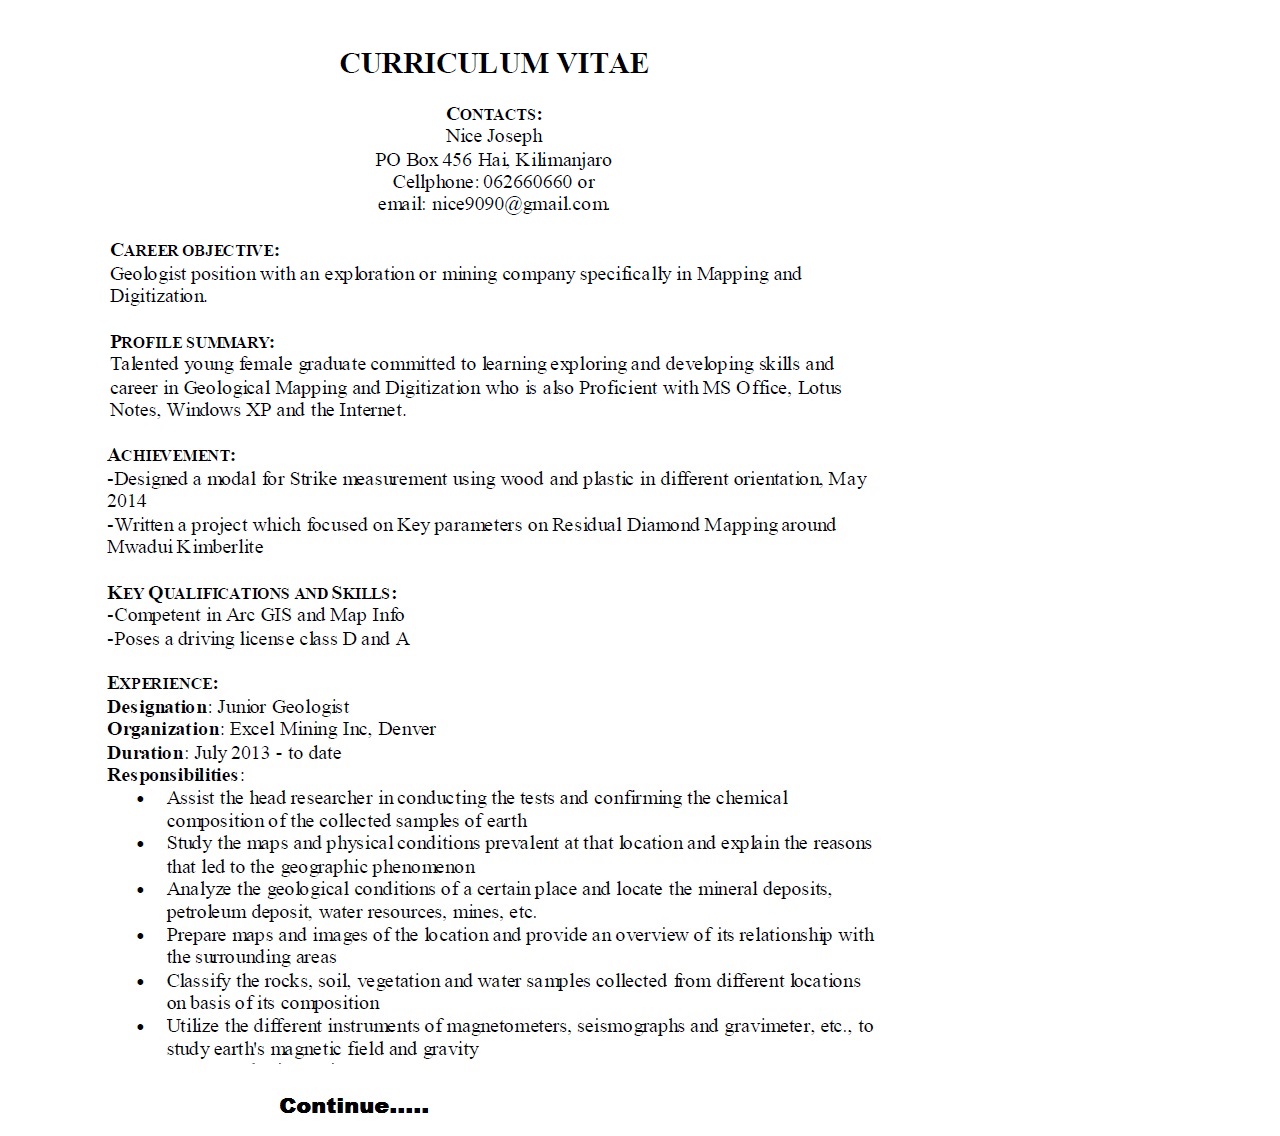 Example of a CV for a Geotechnician/Geologist